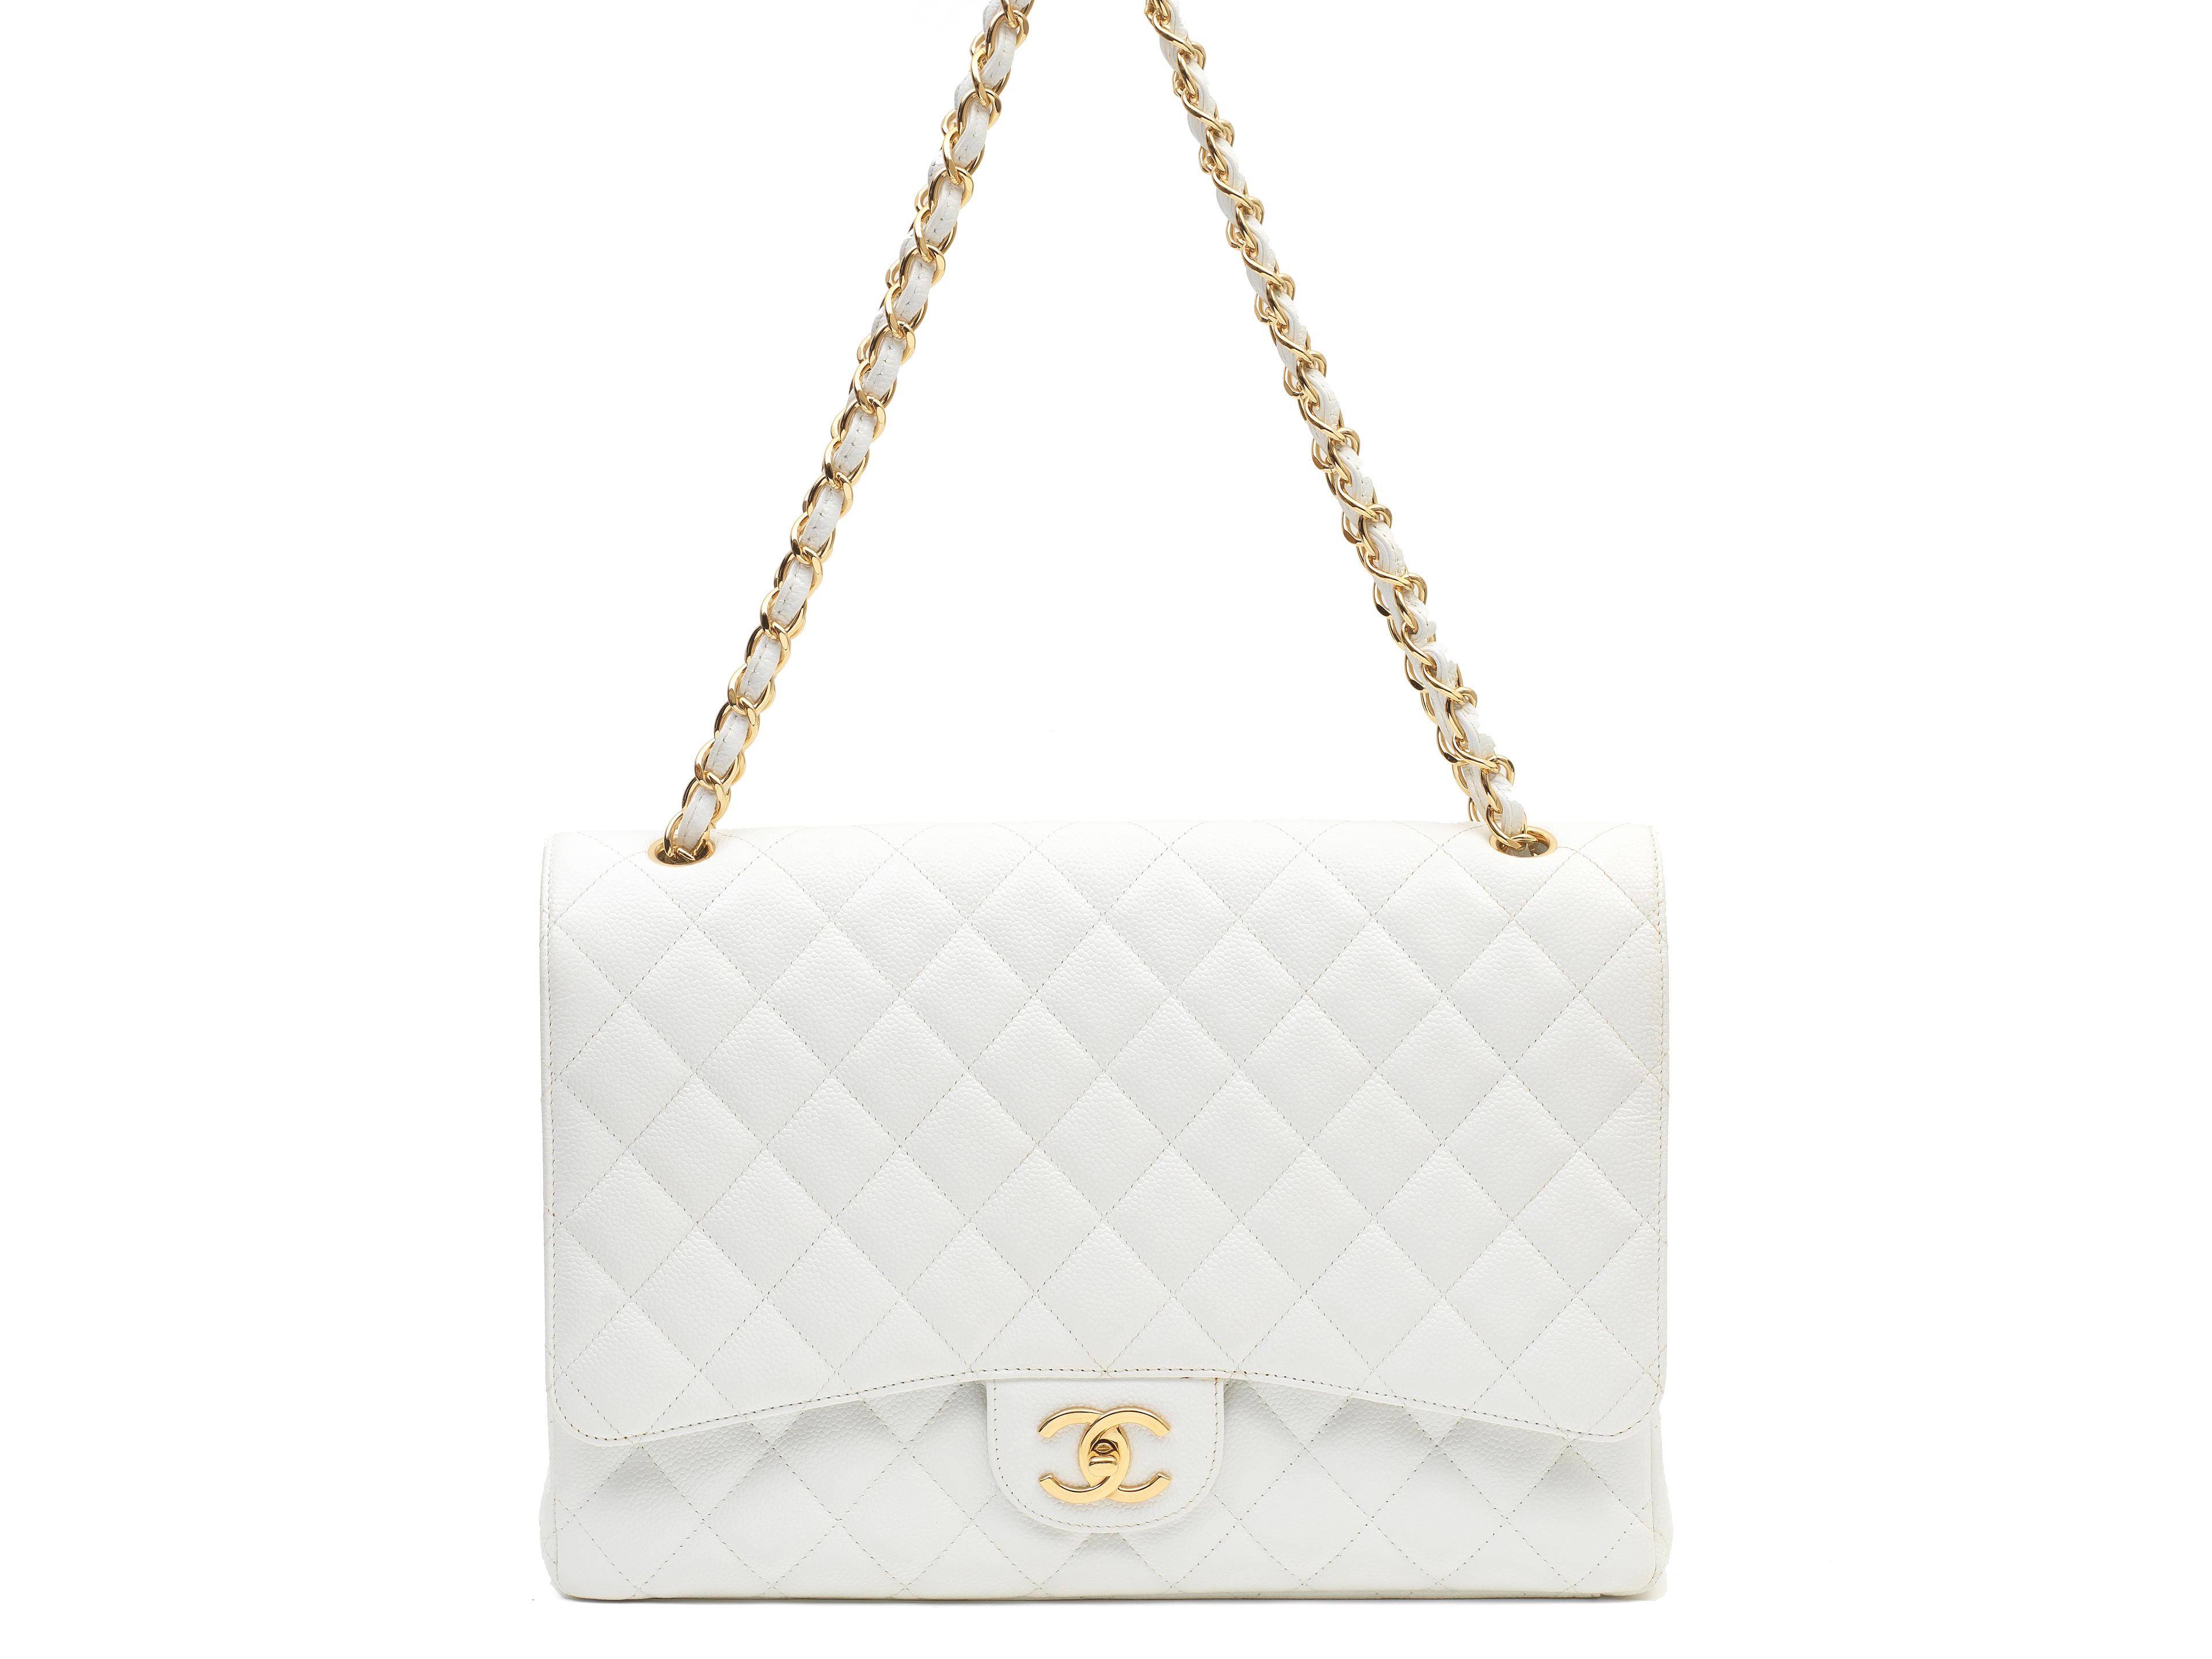 A WHITE CAVIAR MAXI DOUBLE FLAP BAG Chanel, 2011 (includes serial sticker and dust bag)